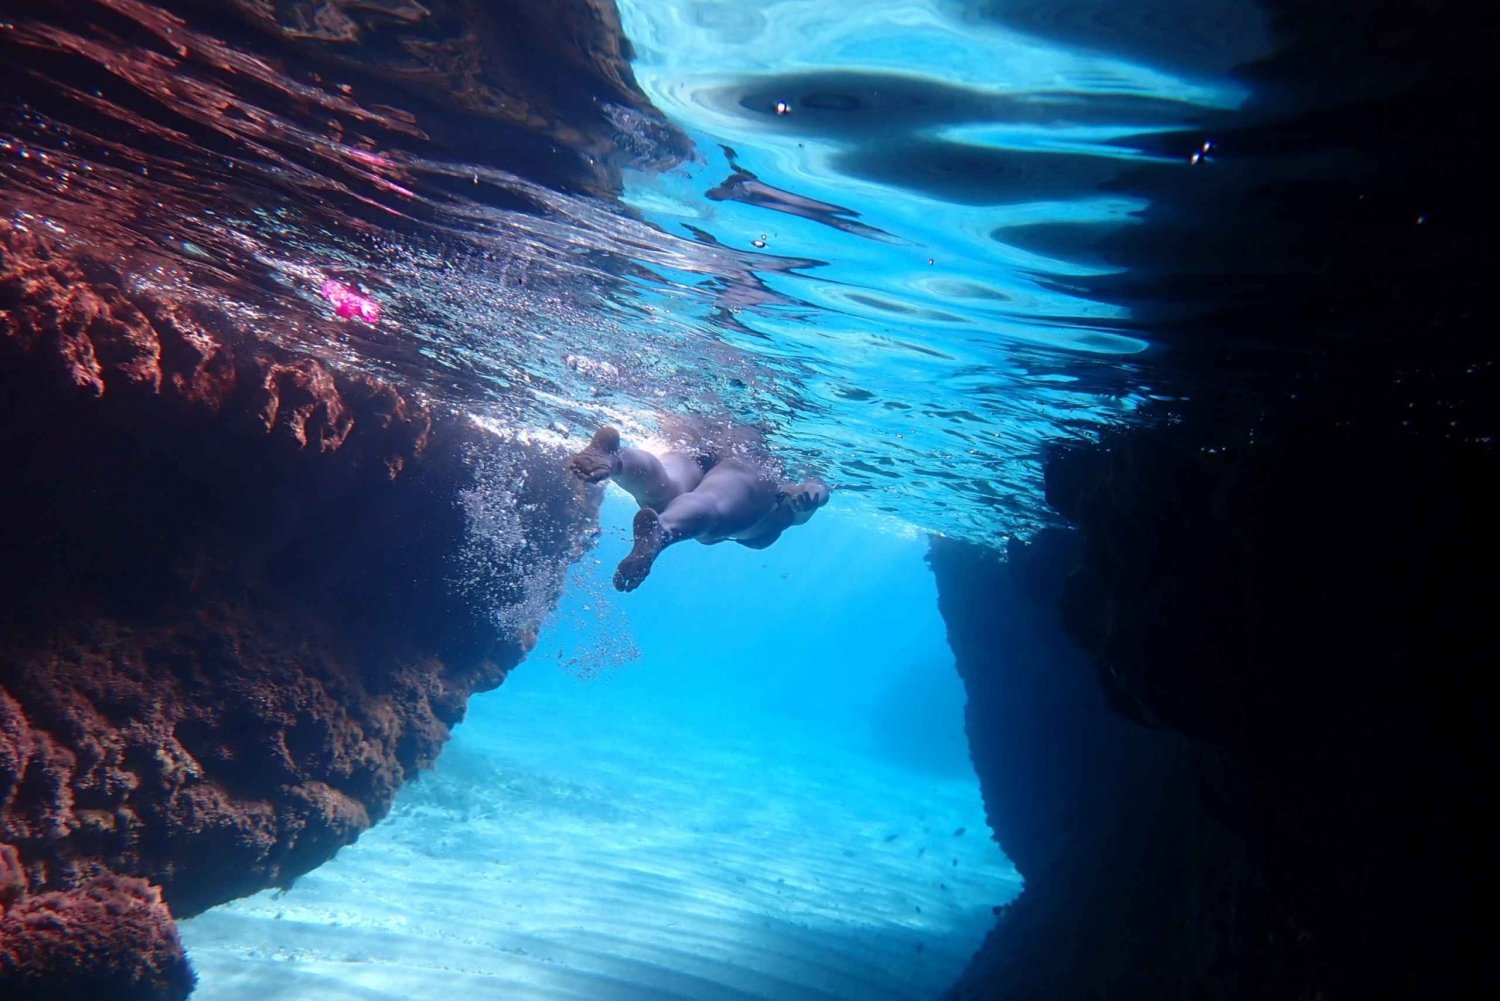 Guided Agia Napa C Caves + Konnos Snorkelling trip - NO boat